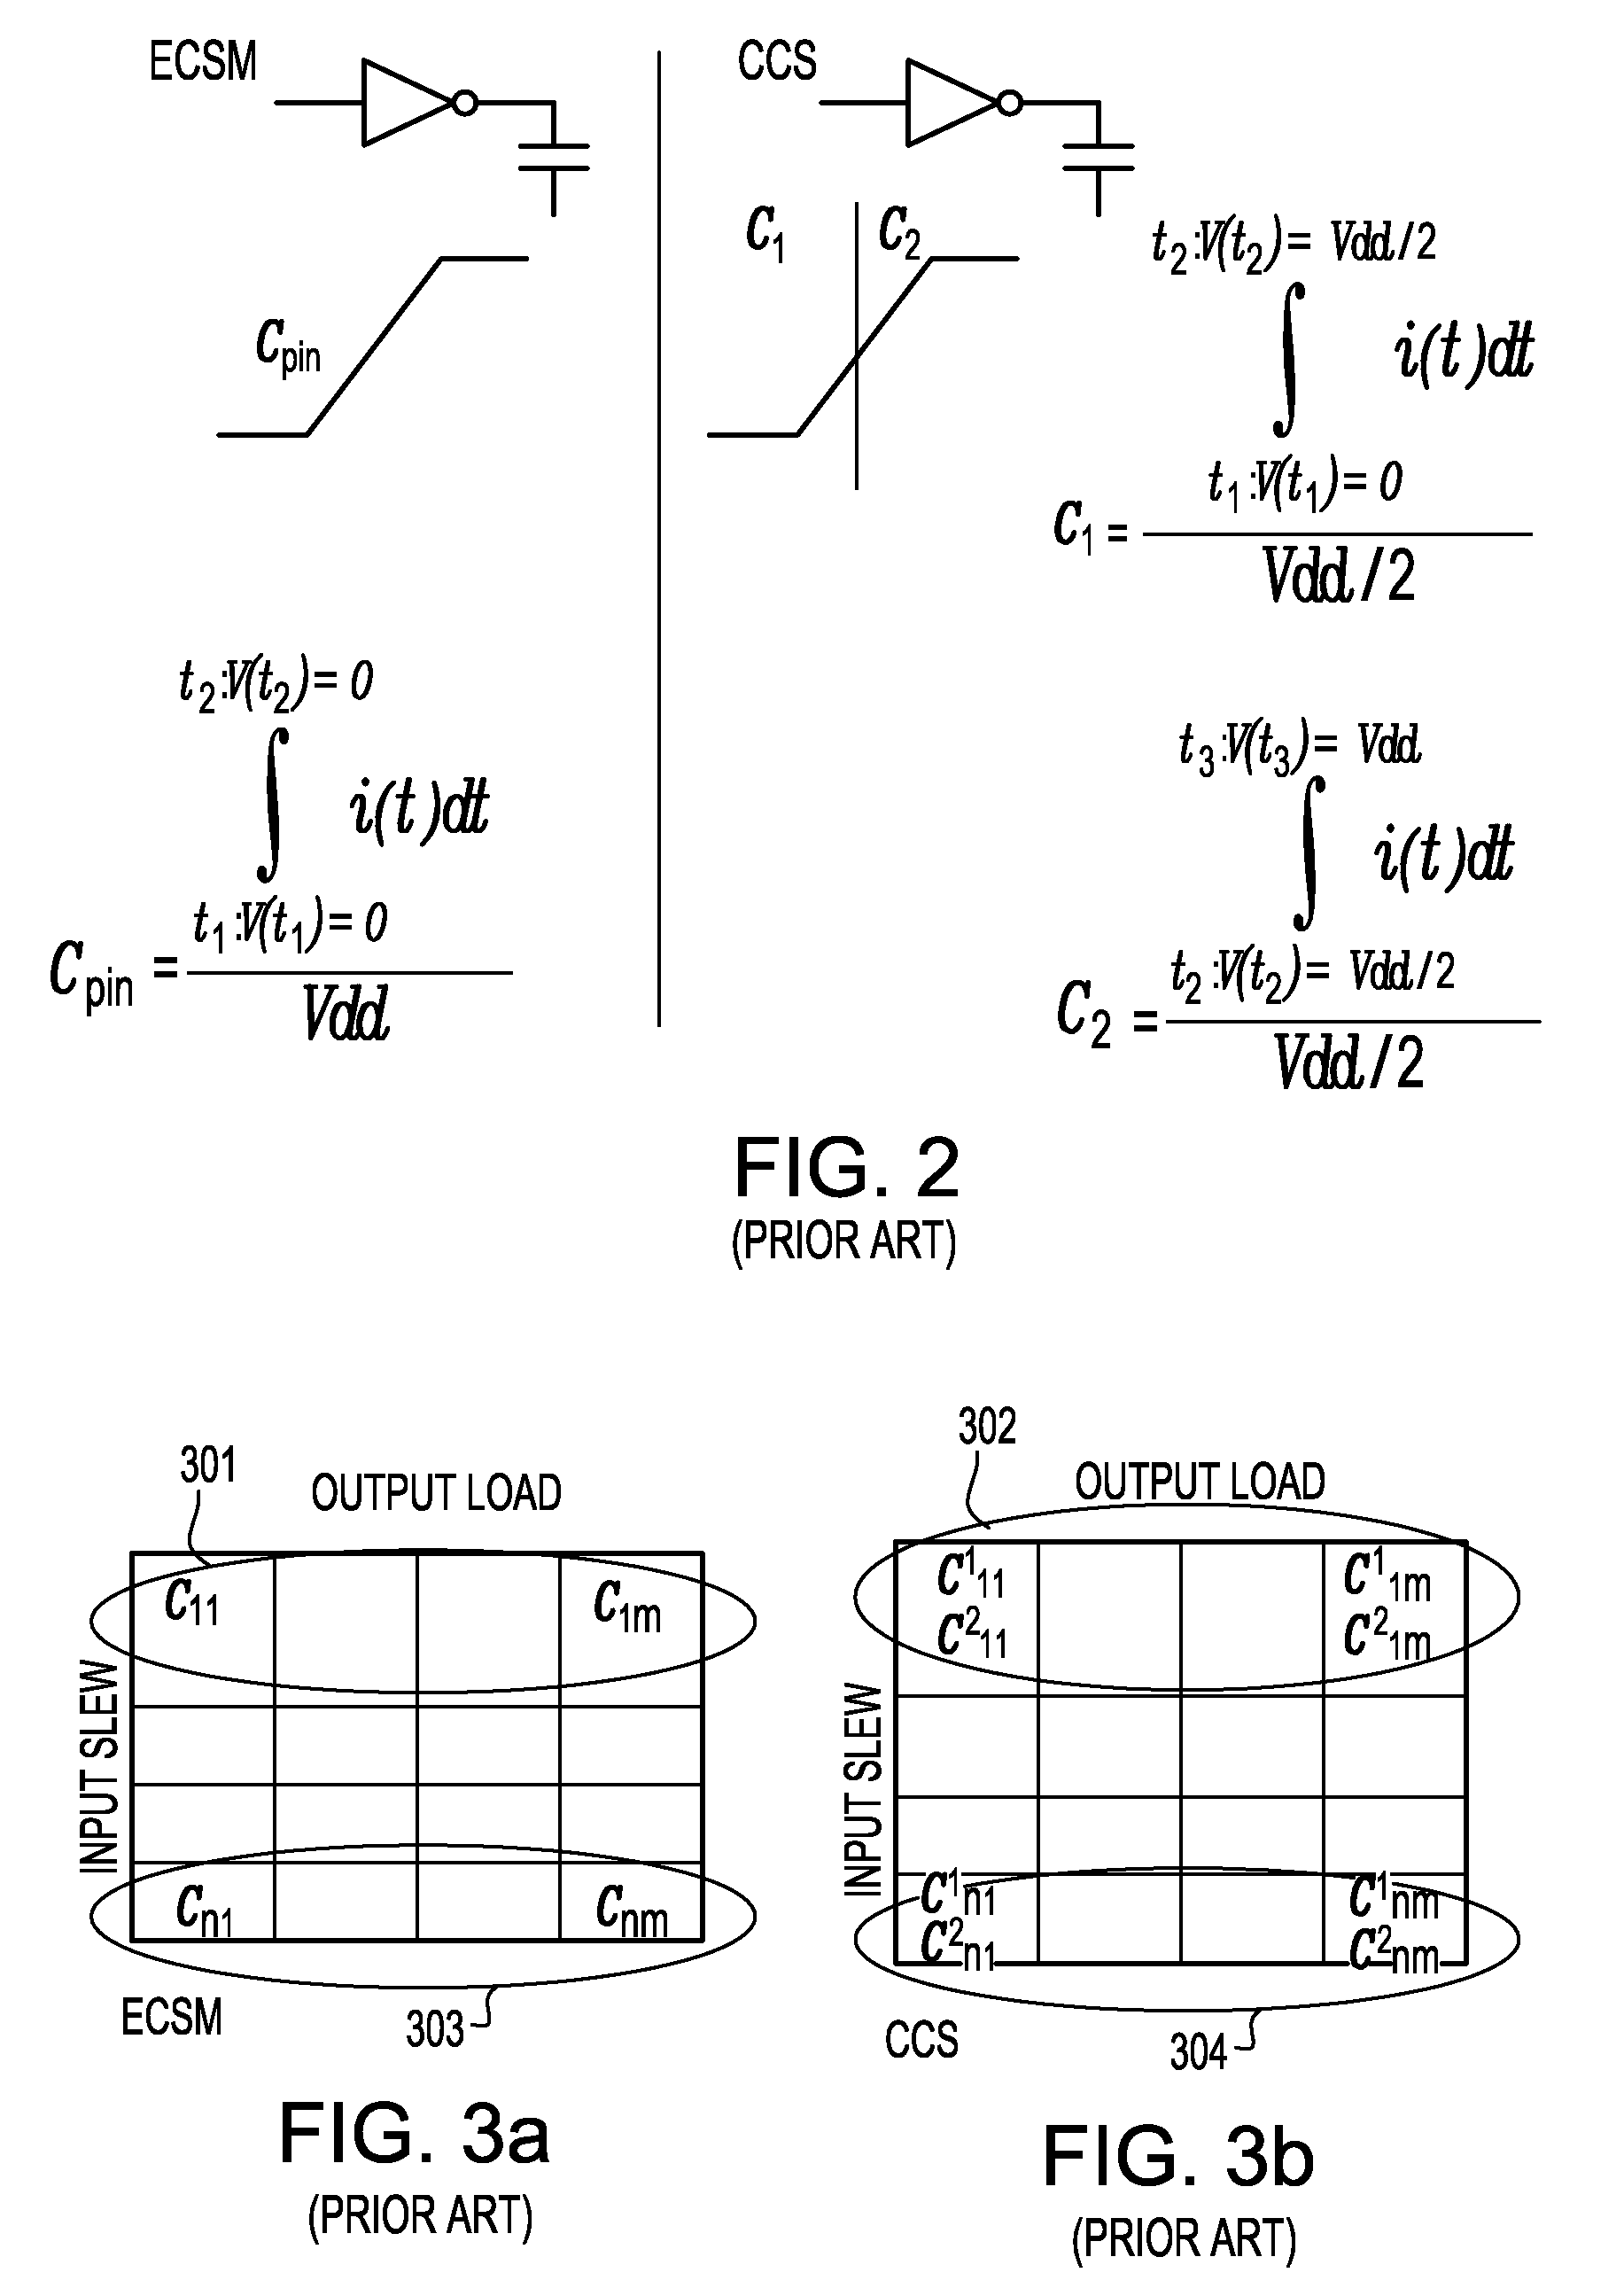 Method of modeling and employing the CMOS gate slew and output load dependent pin capacitance during timing analysis